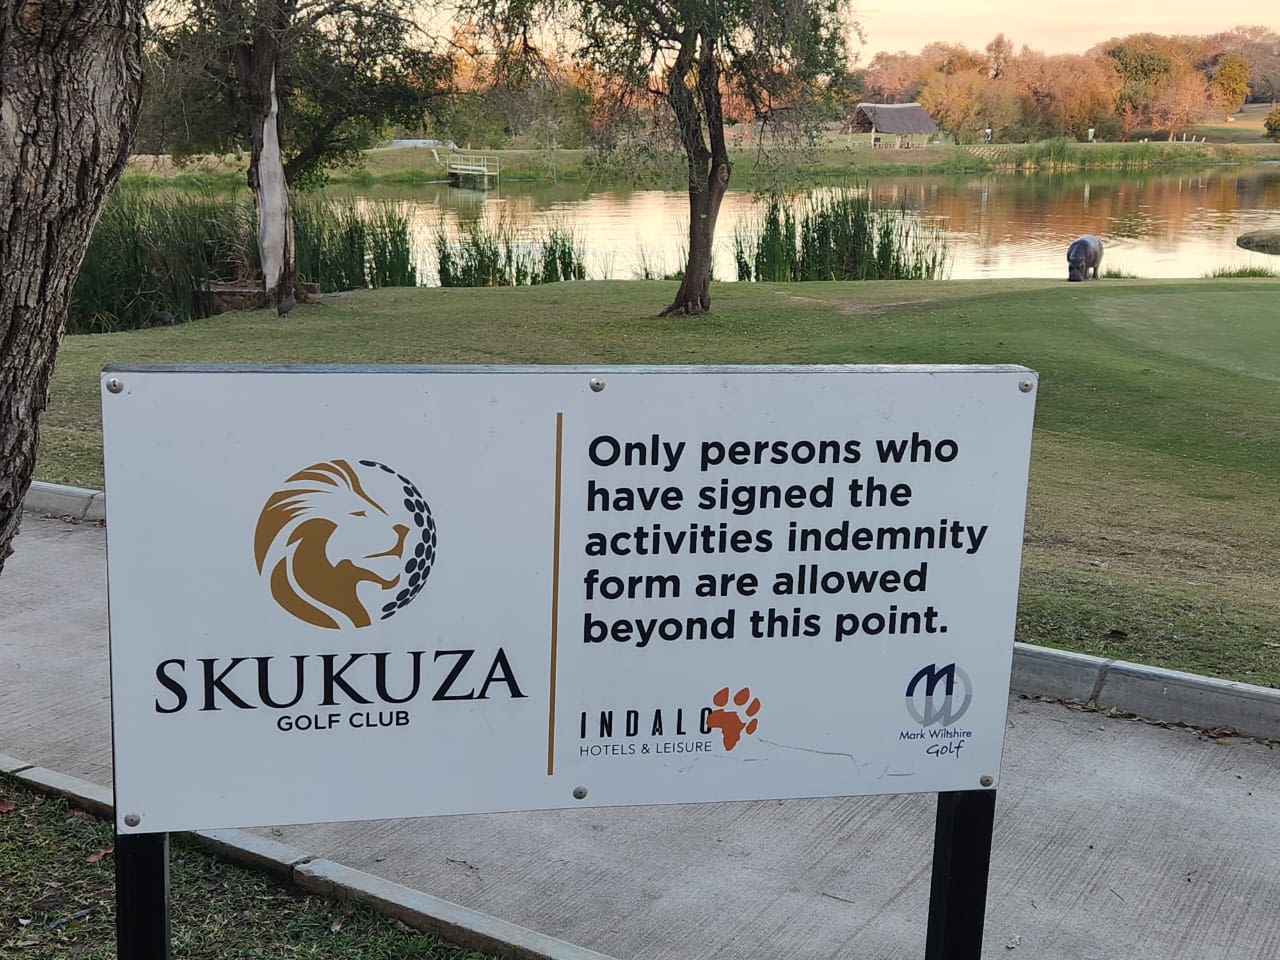 Players must sign an indemnity form before teeing up at Skukuza.